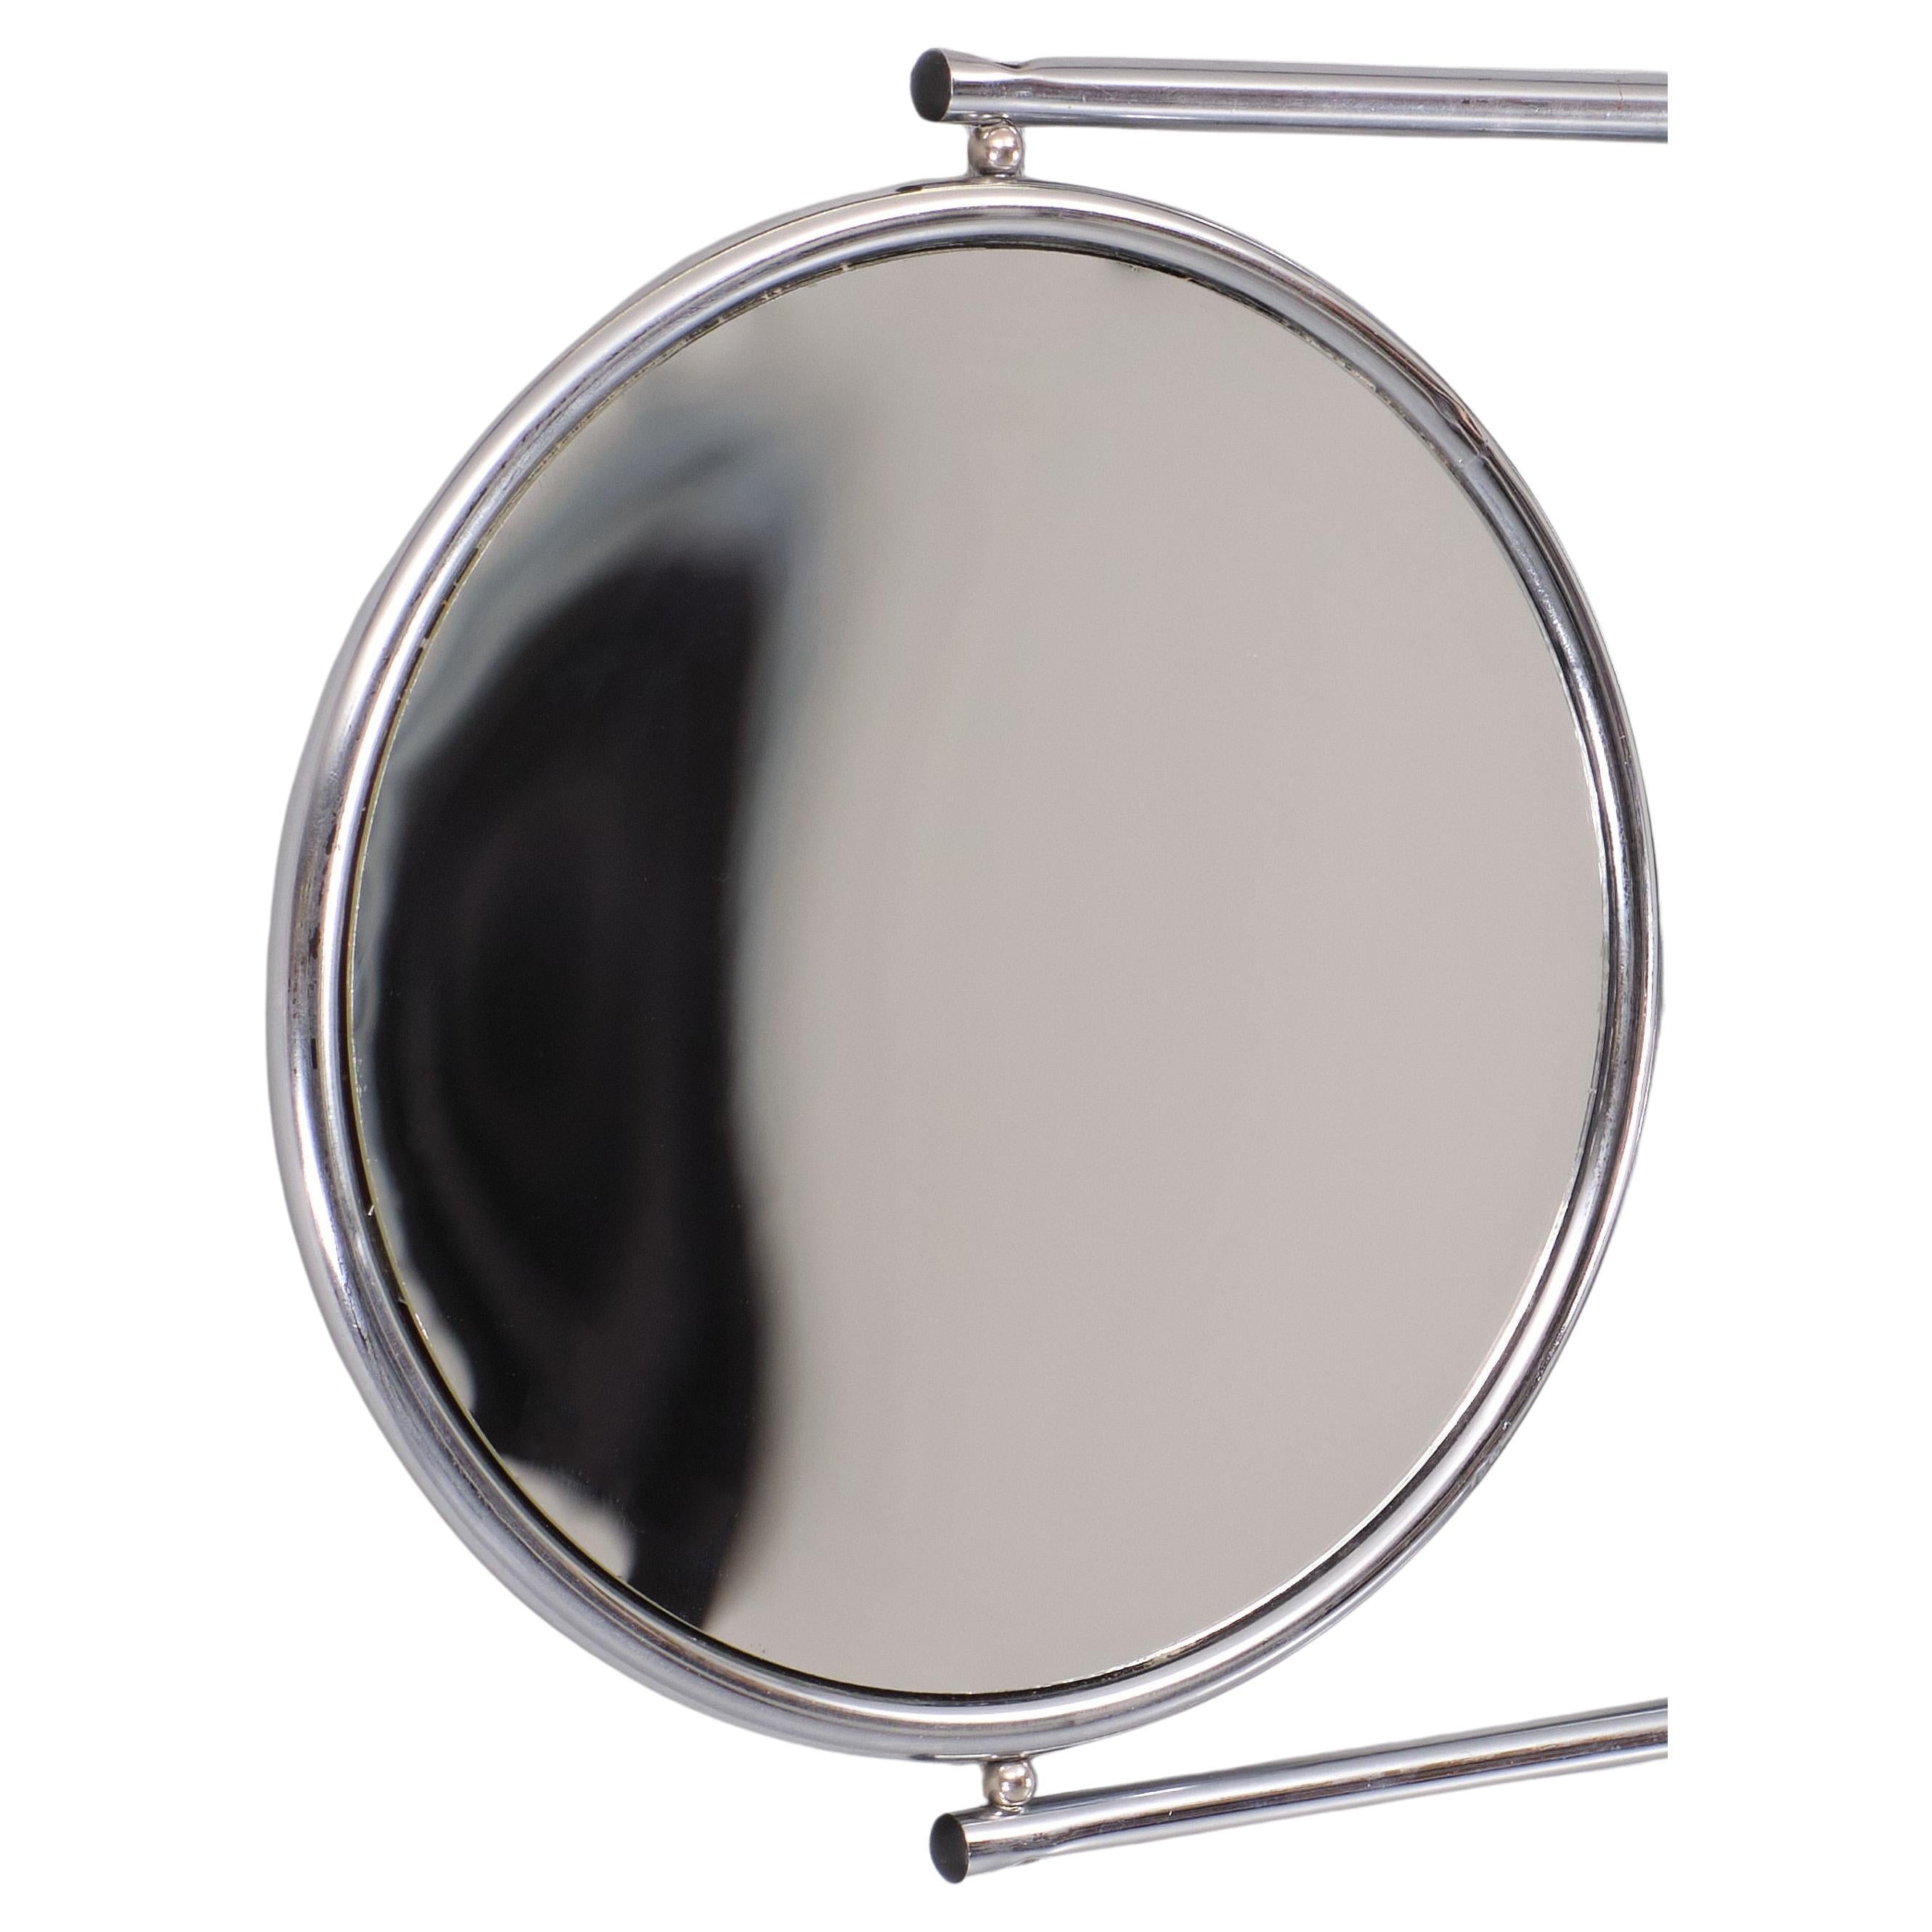 European Double Mirror with articulating swivel arm Bieffeplast  1980s Italy  For Sale